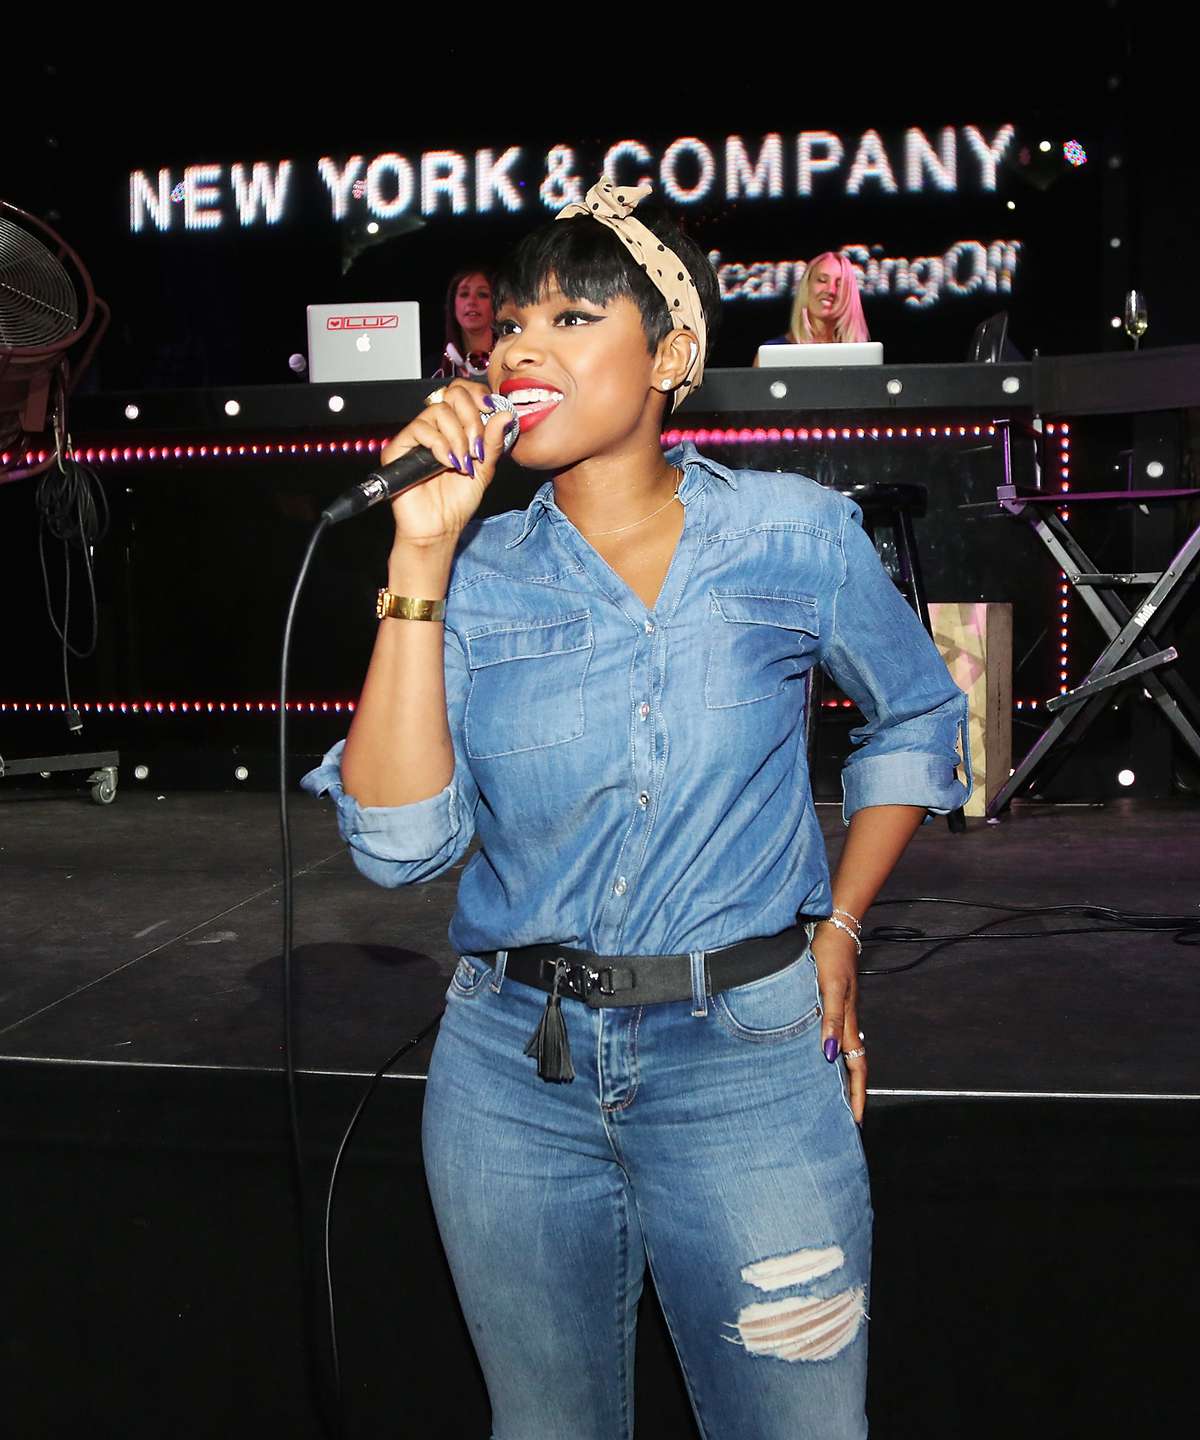 Jennifer Hudson speaks during the #SohoJeansSingOff hosted by New York & Company with Jennifer Hudson at Marquee on July 22, 2015 in New York City.